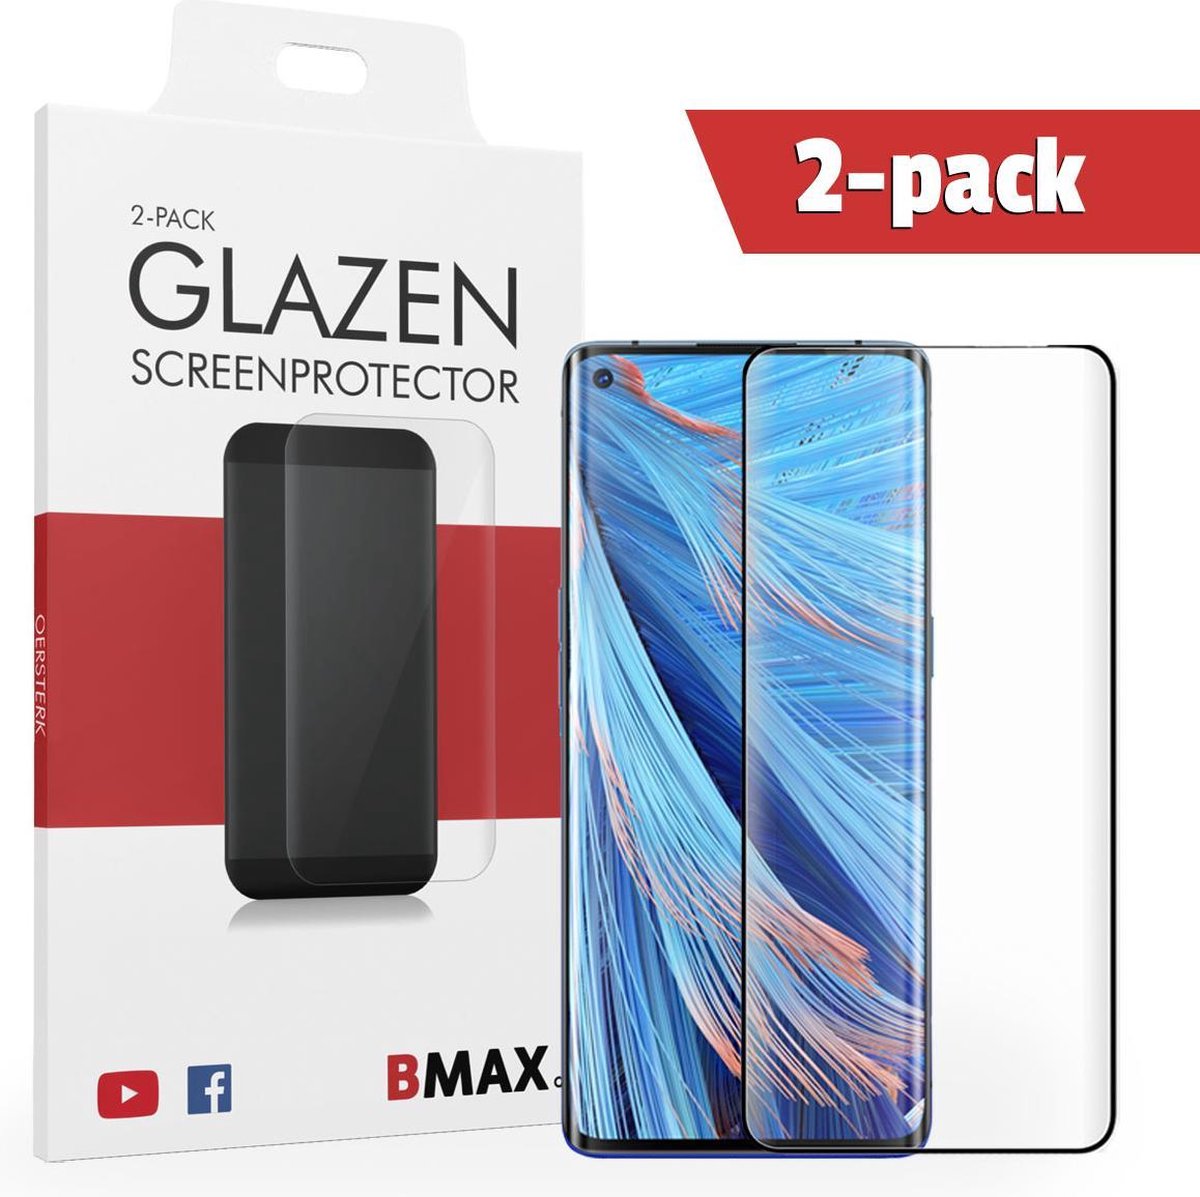 2-pack Bmax Oppo Find X2 Neo Screenprotector - Glass - Full Cover 5d - Black/zwart